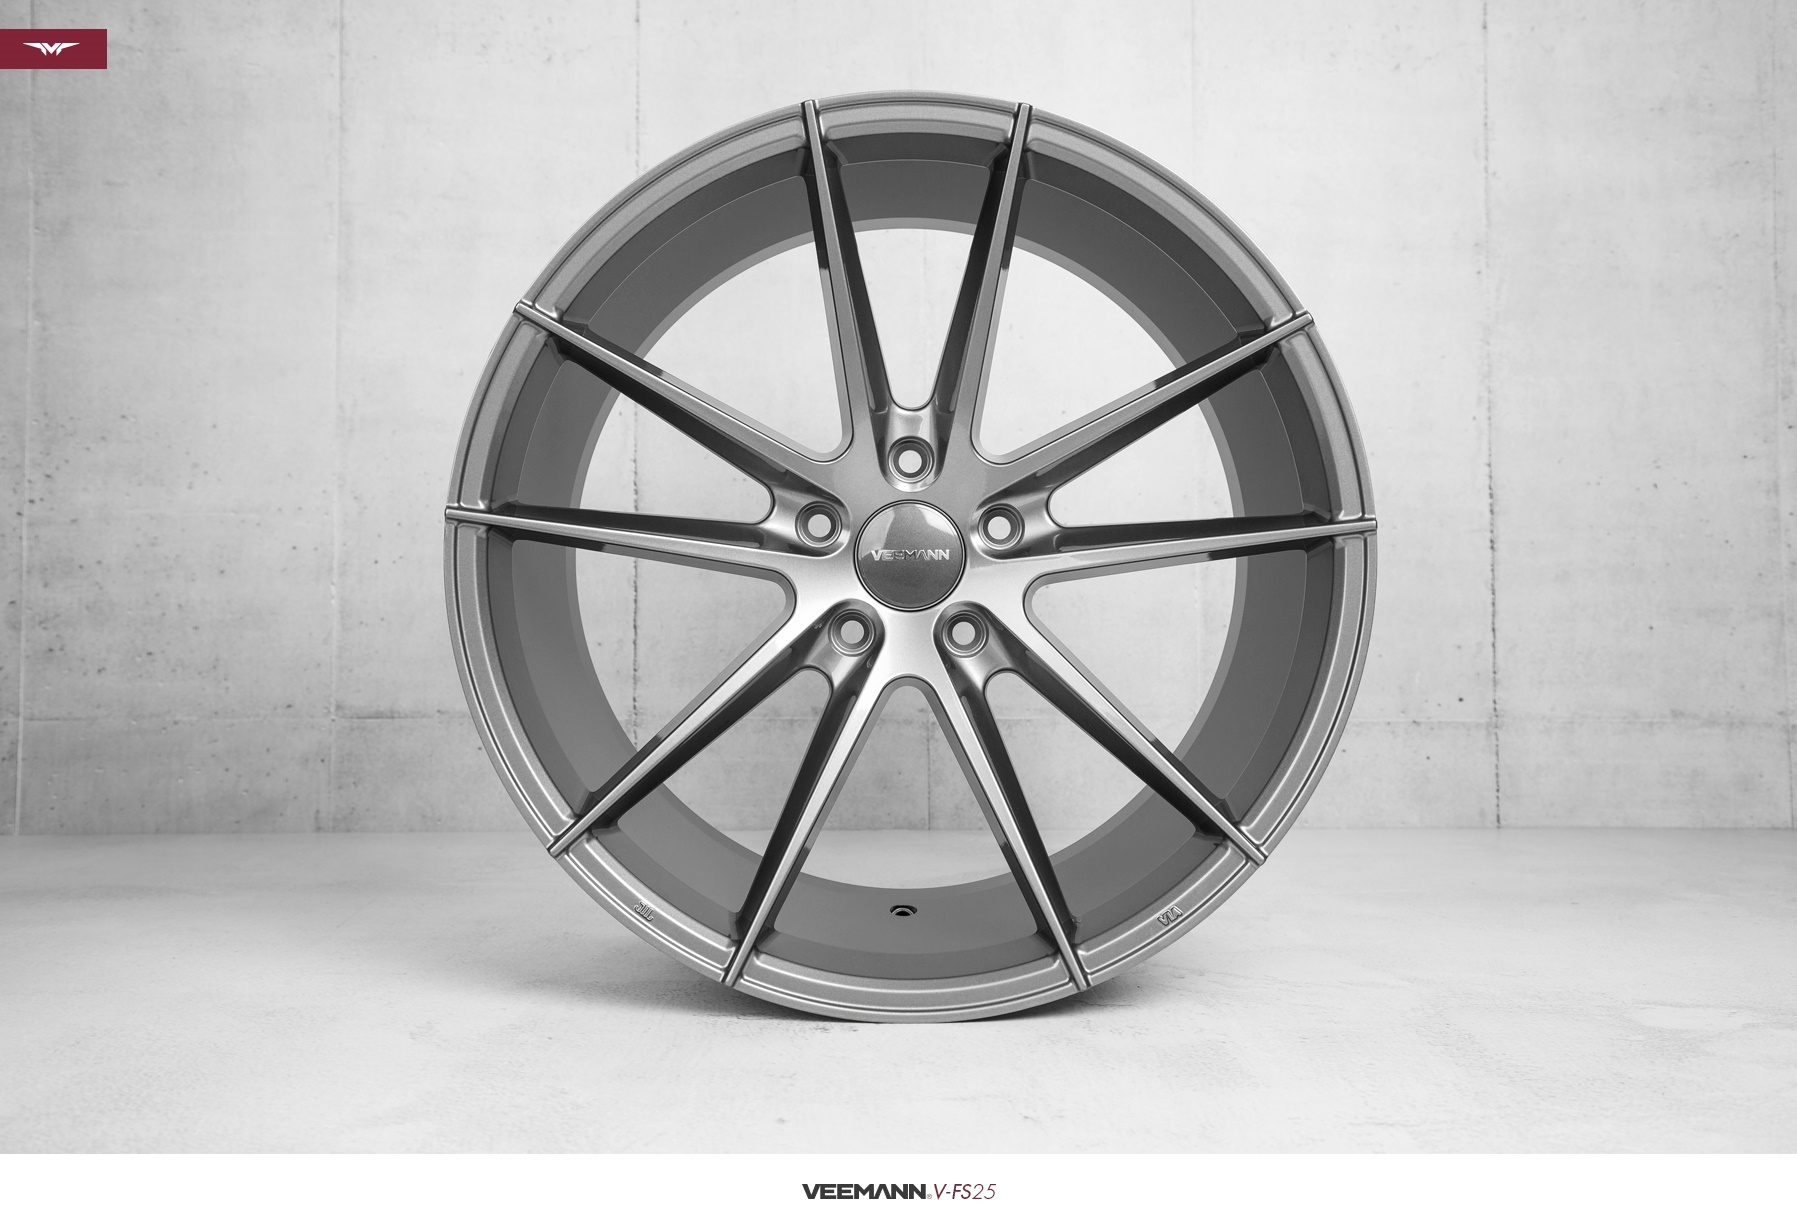 NEW 19  VEEMANN V FS25 ALLOY WHEELS IN GLOSS GRAPHITE WITH WIDER 9 5  REARS et42 40